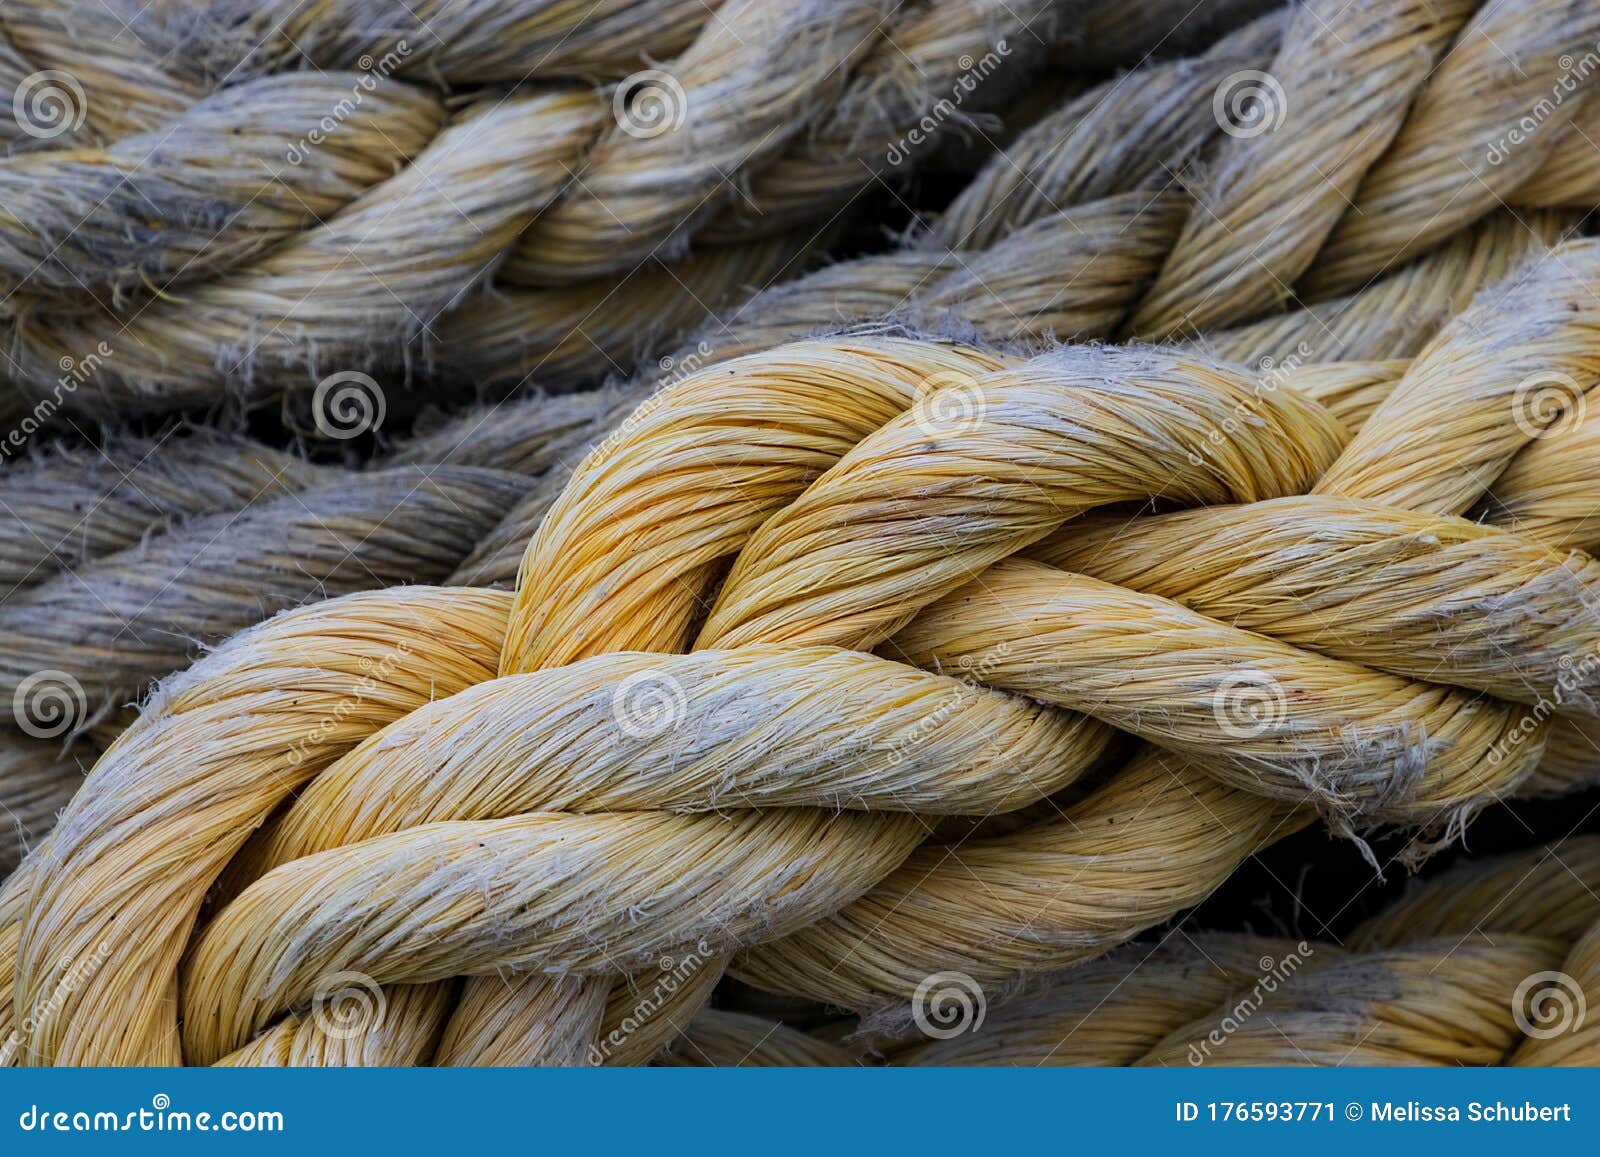 https://thumbs.dreamstime.com/z/thick-double-braided-yellow-cargo-rope-discolored-gray-shipping-fibers-sticking-out-worn-used-176593771.jpg